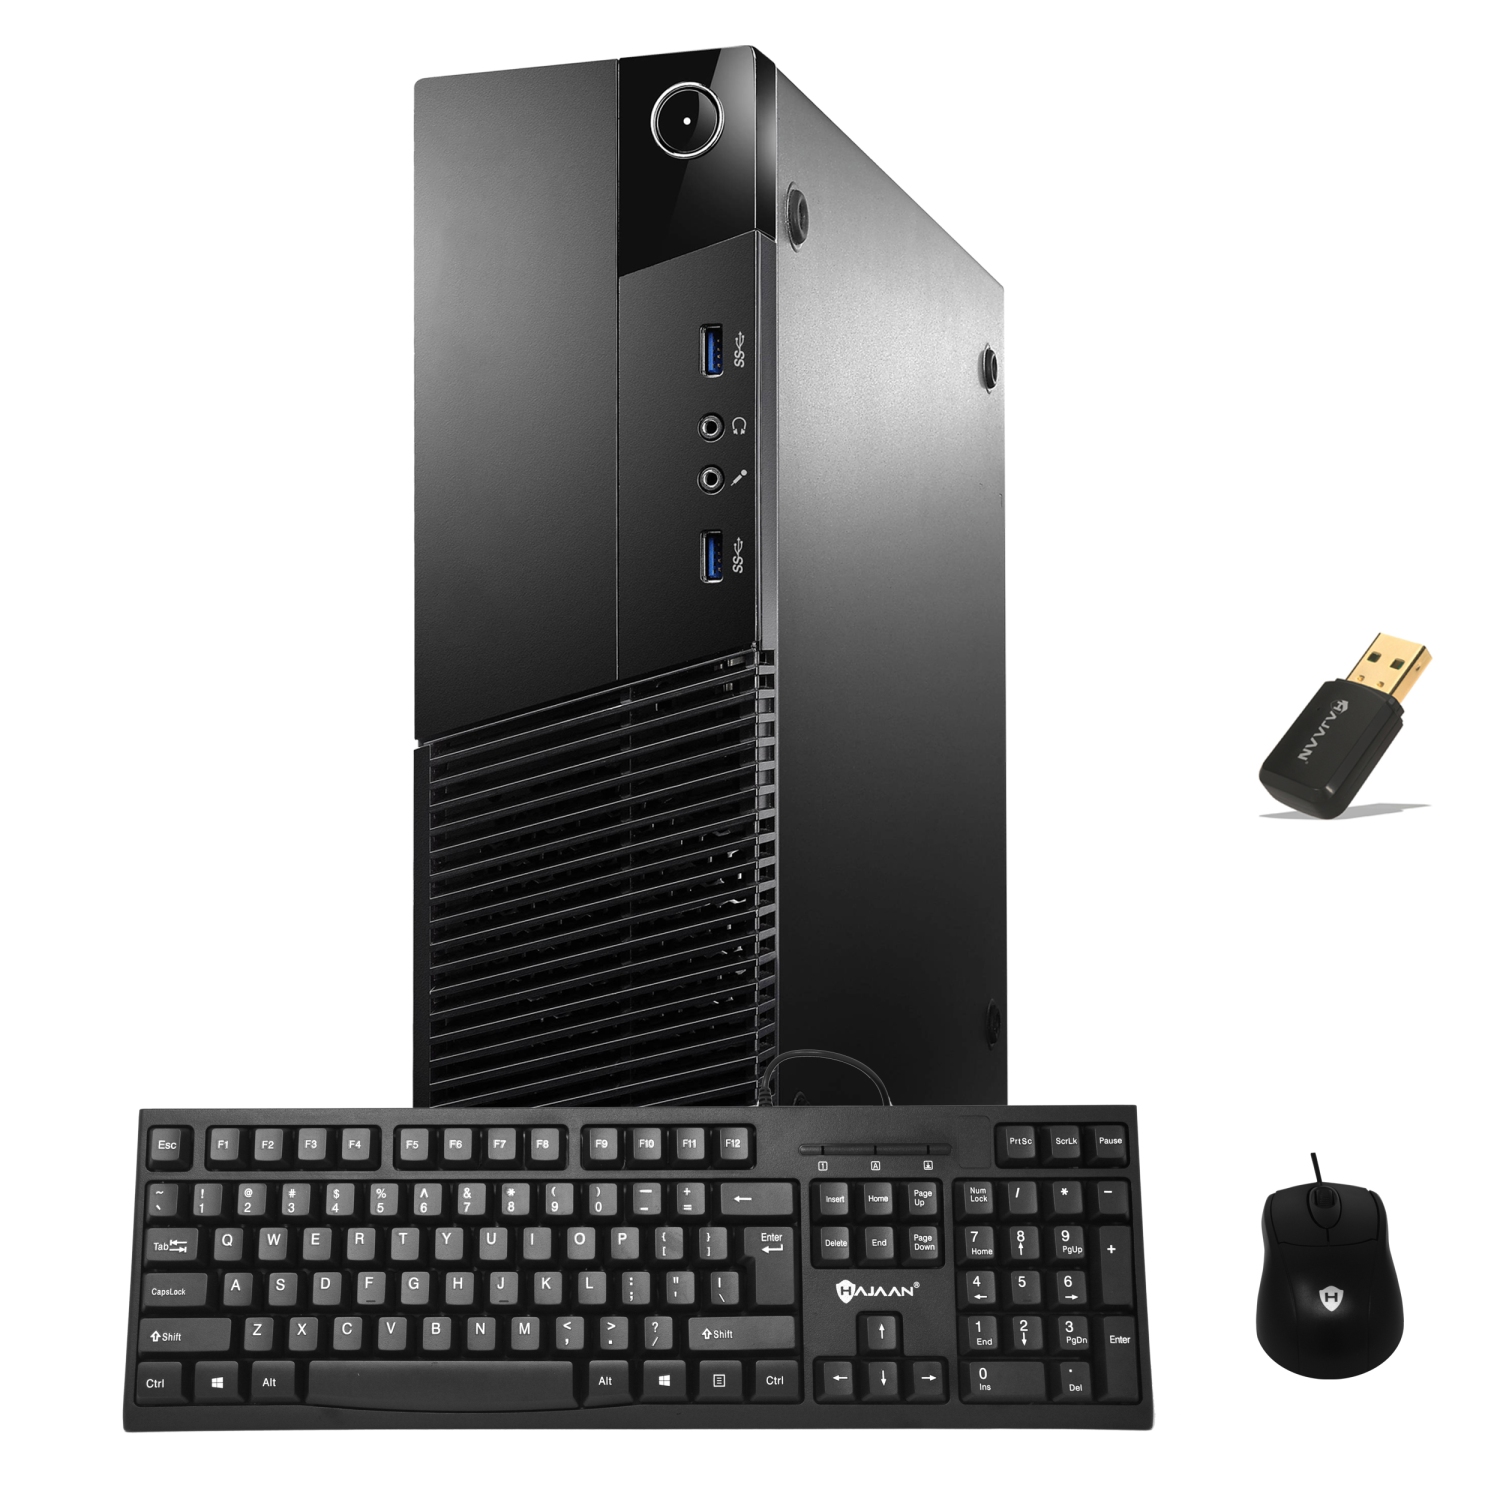 Lenovo ThinkCentre M800 Small Form Factor Desktop PC DVD 16G DDR4 Intel Quad Core i5 6500 up to 3.6GHz Win 10 Pro 64-Multi-Language Support English/Spanish/French 3T Renewed WiFi BT 4.0